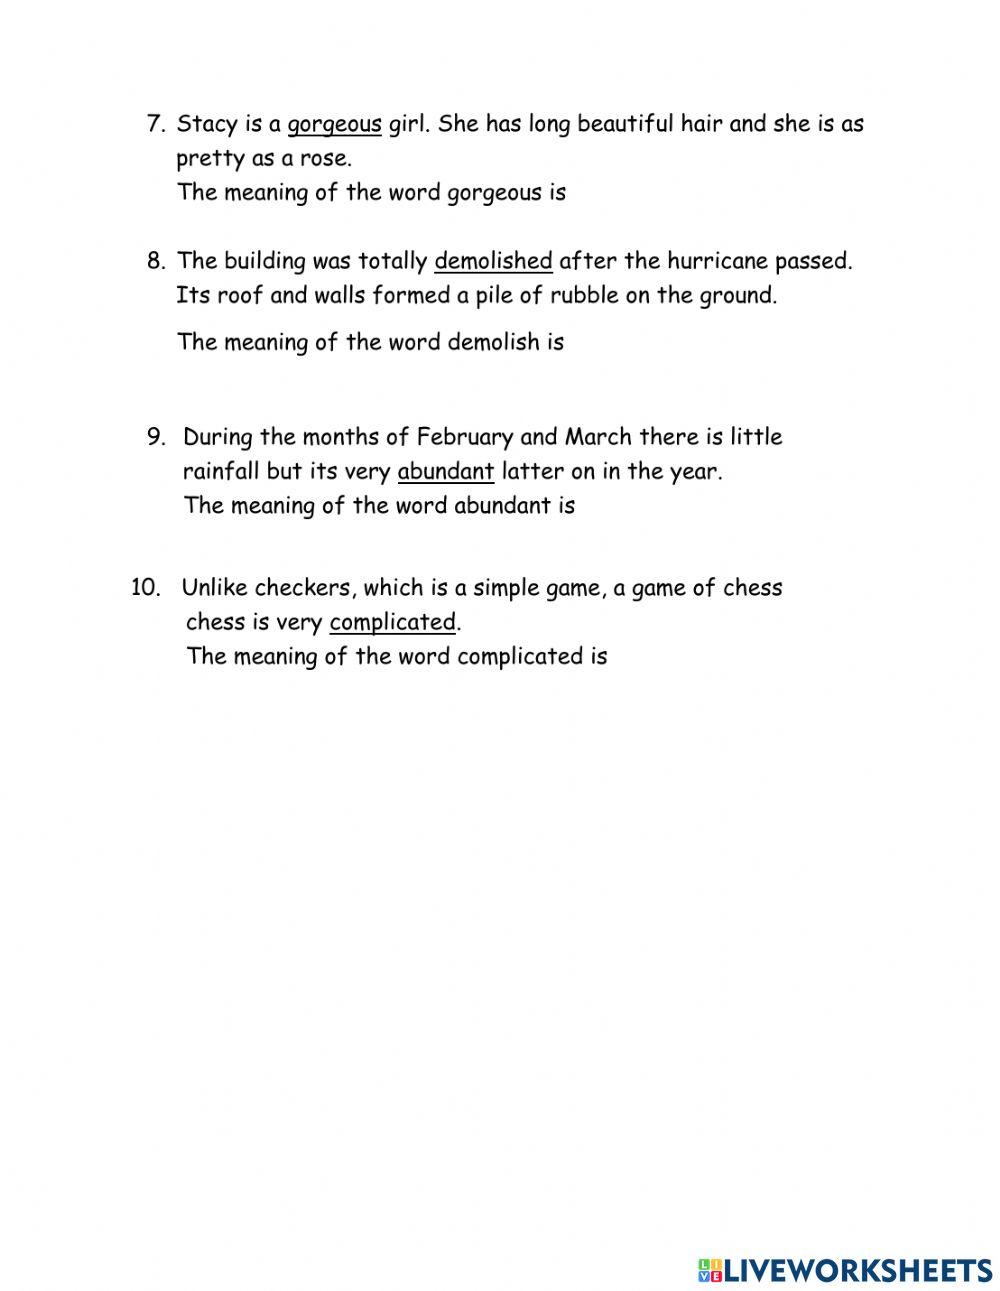 Live worksheet on use of context clues